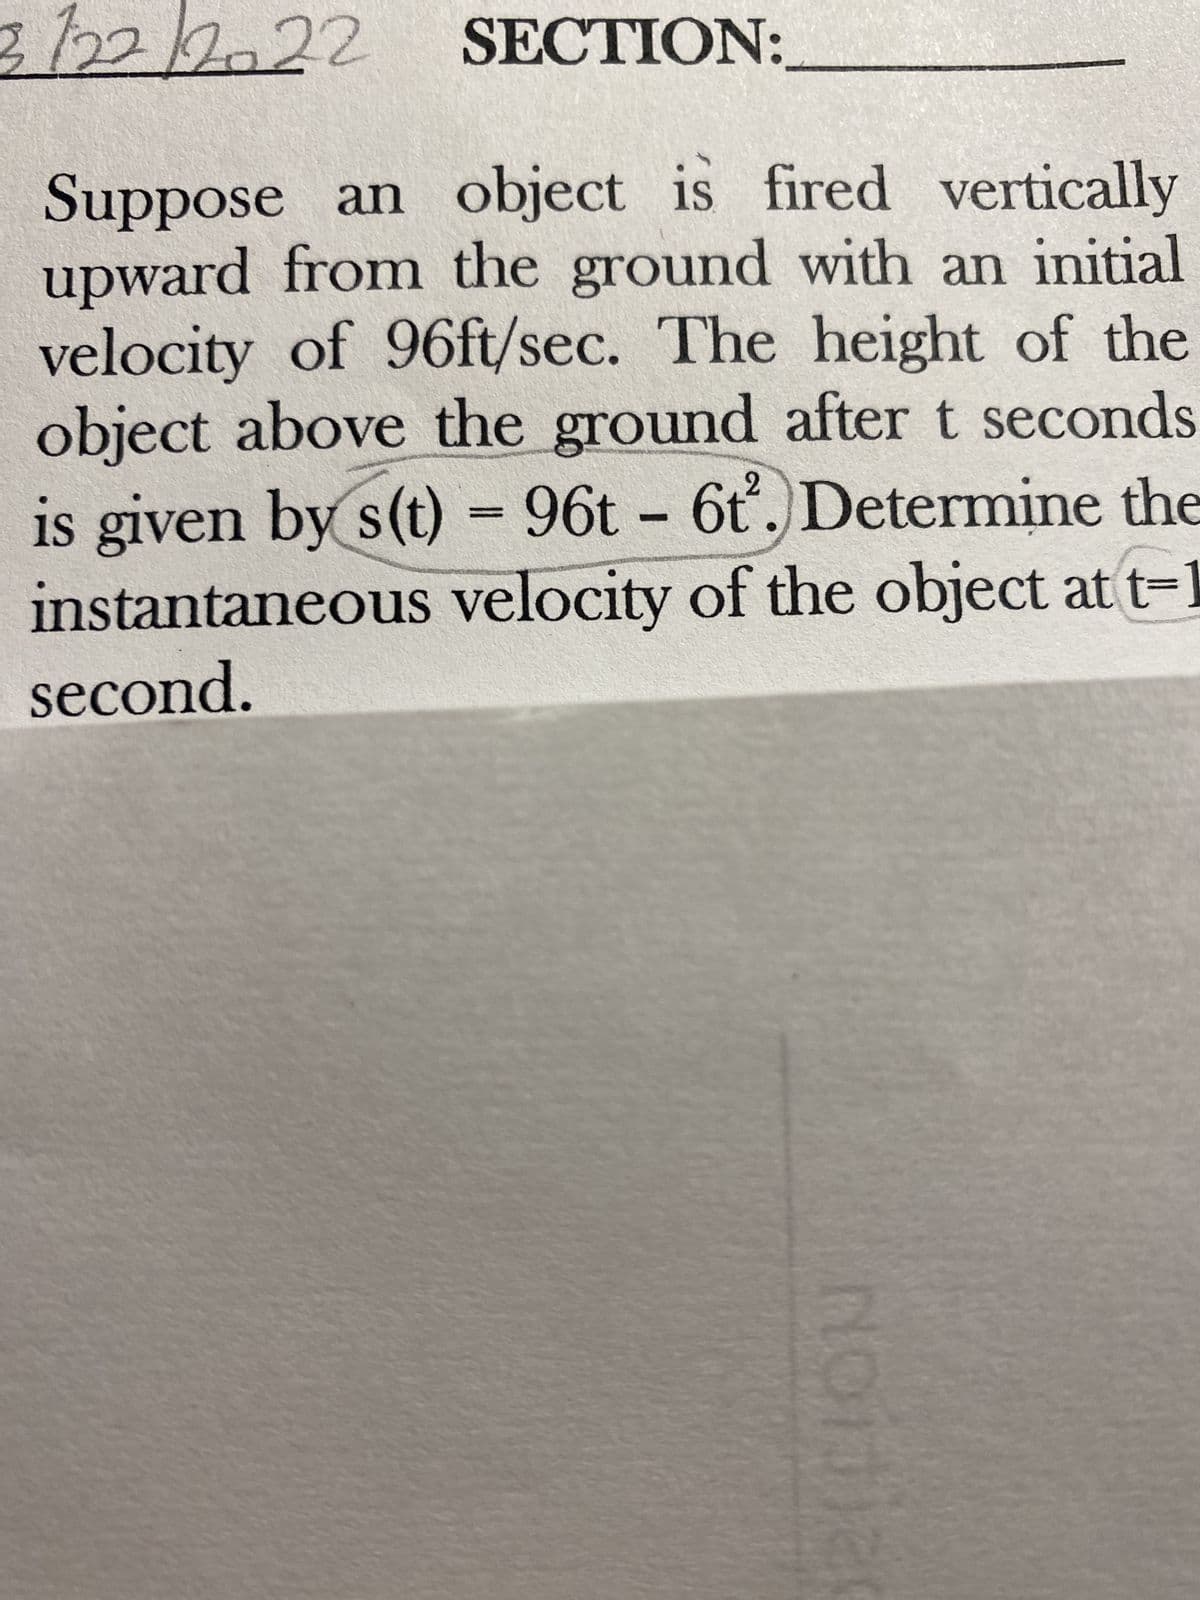 3122222 SECTION:
Suppose an object is fired vertically
upward from the ground with an initial
velocity of 96ft/sec. The height of the
object above the ground after t seconds
is given by s(t) = 96t - 6t. Determine the
instantaneous velocity of the object at t-1
second.